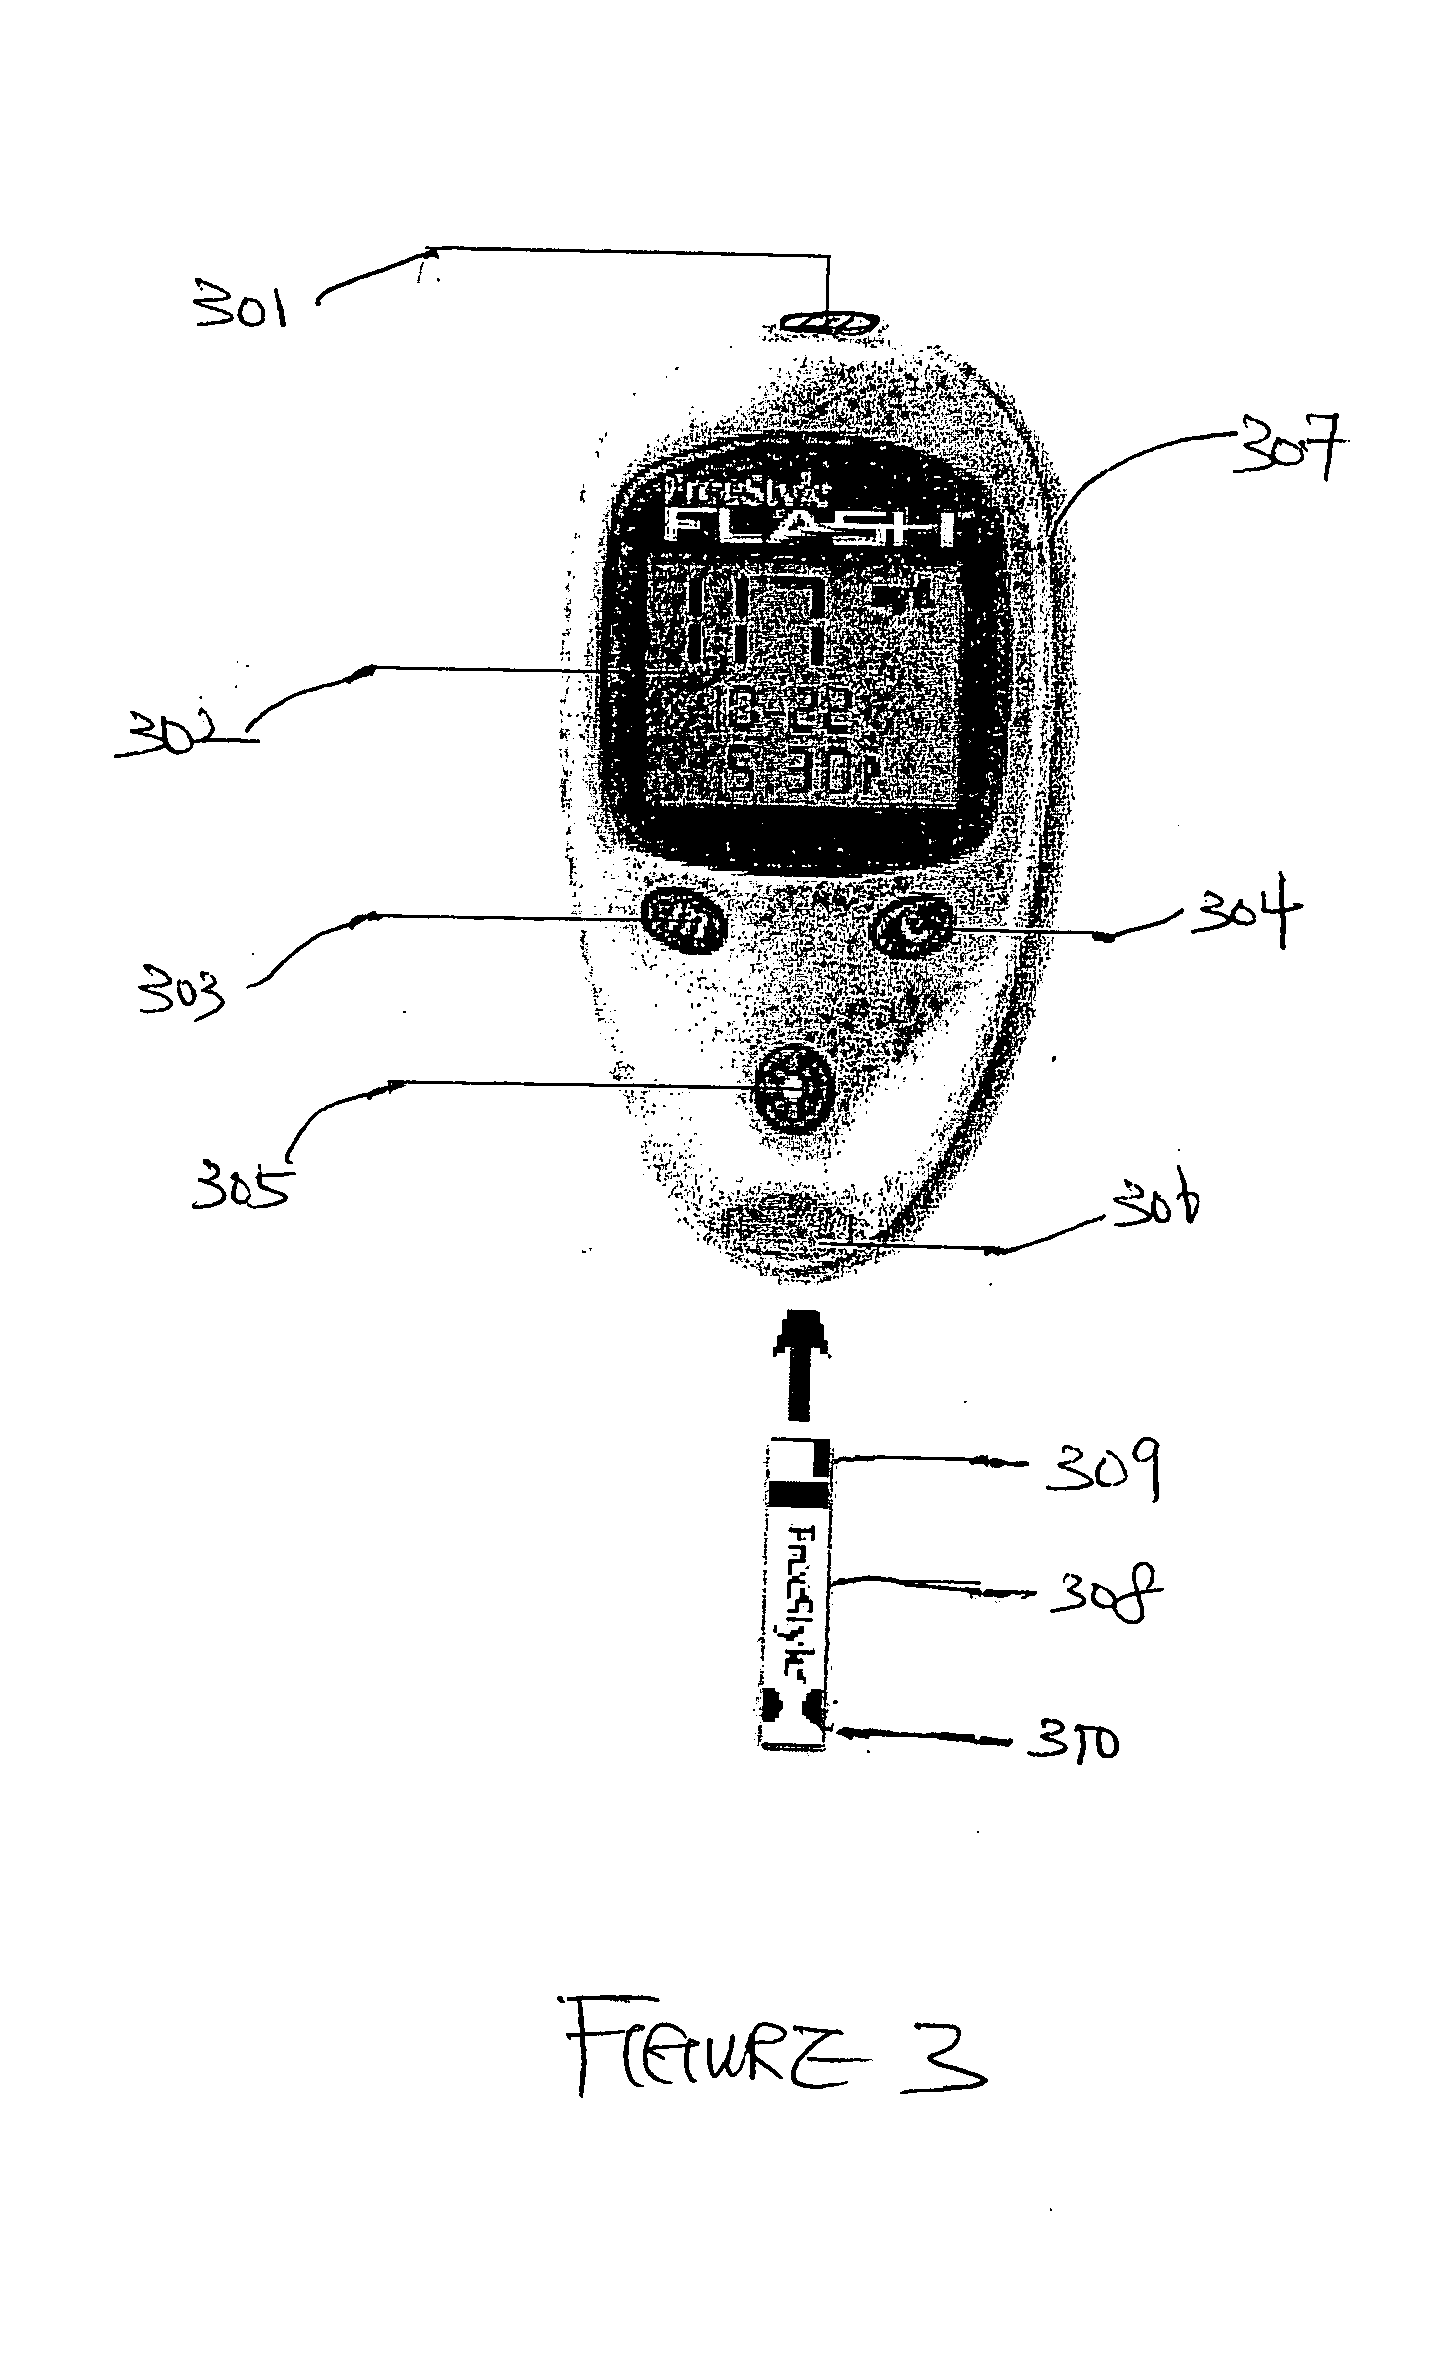 Method and apparatus for providing power management in data communication systems